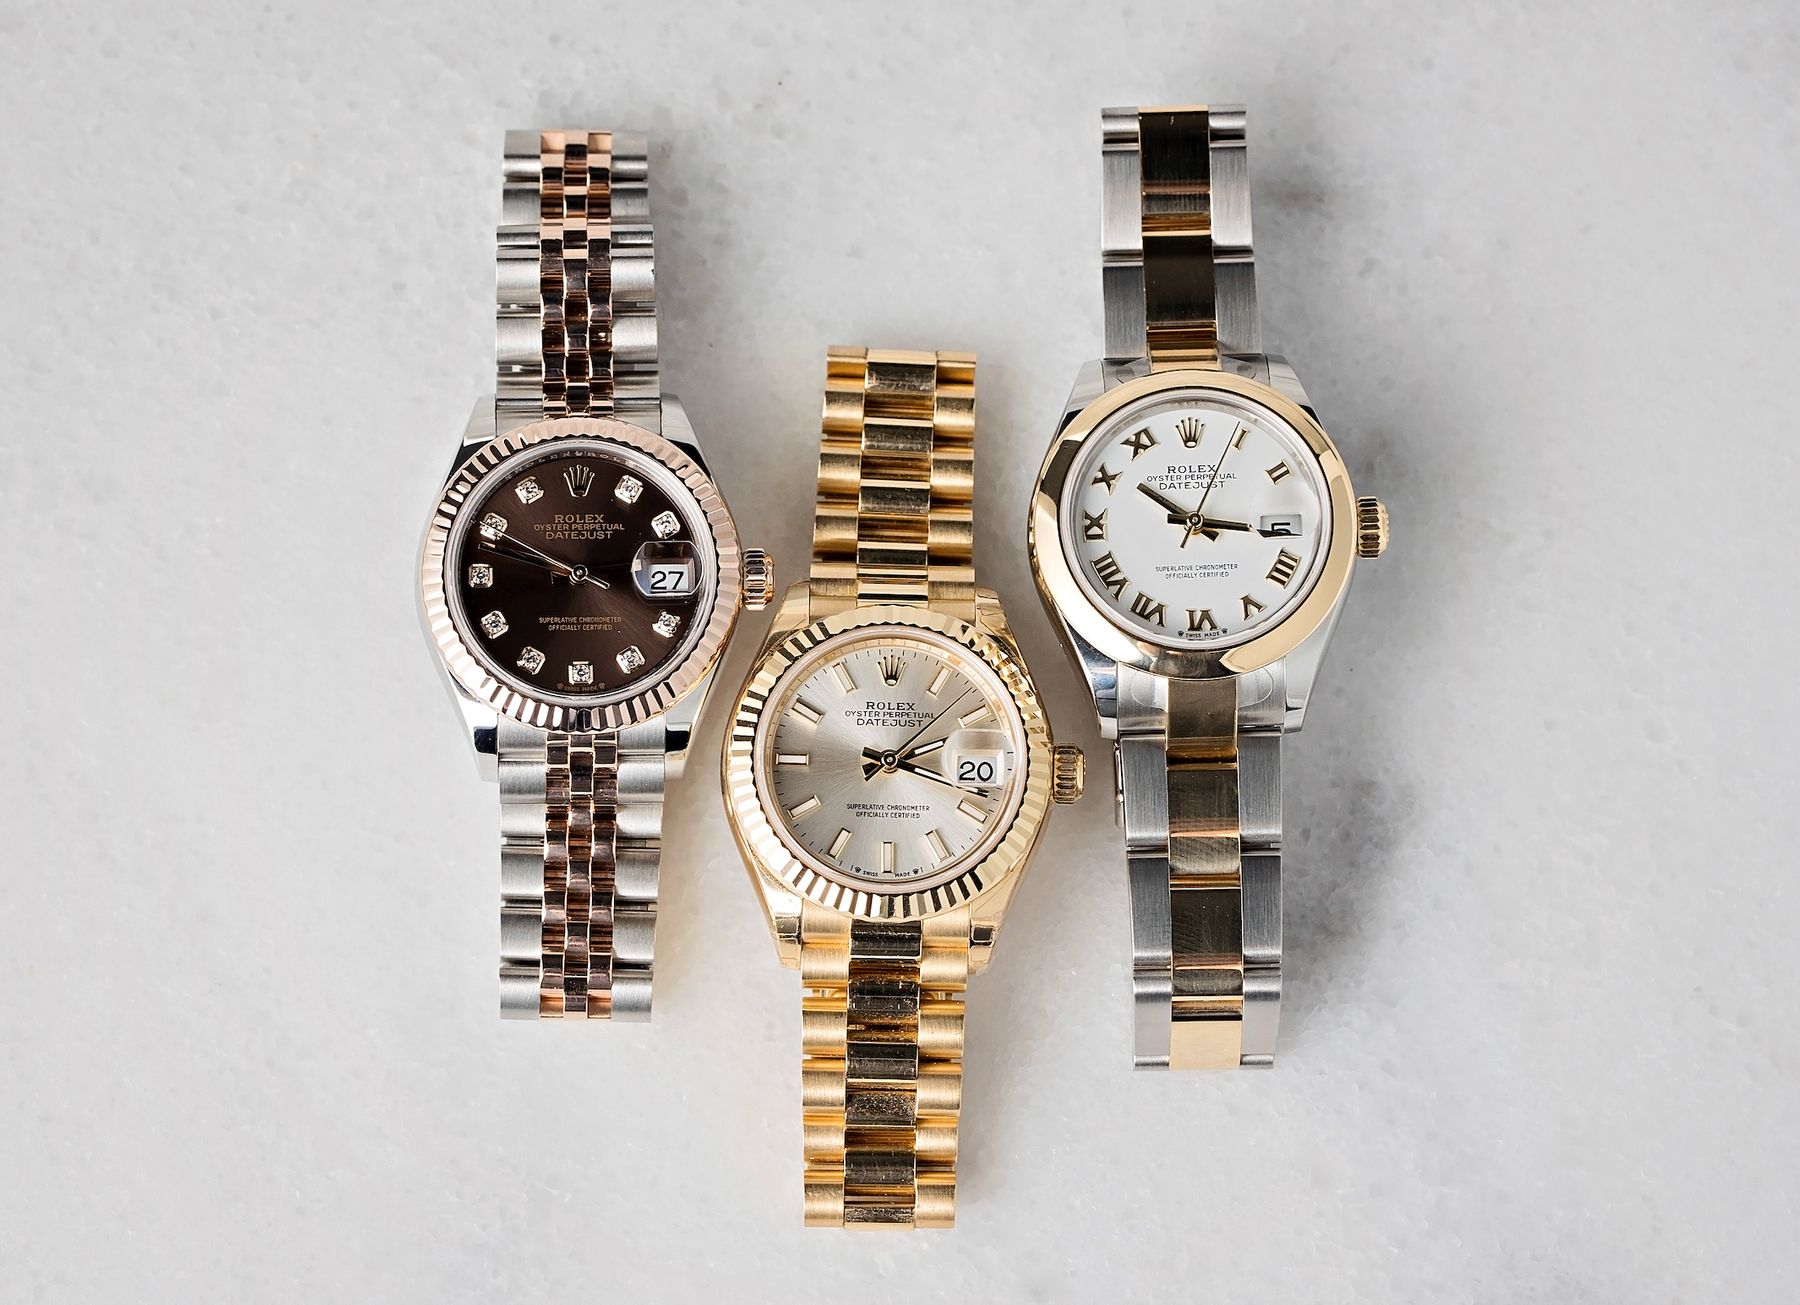 Newest Generation Of Dress Watches For Women: The Lady-Datejust 28